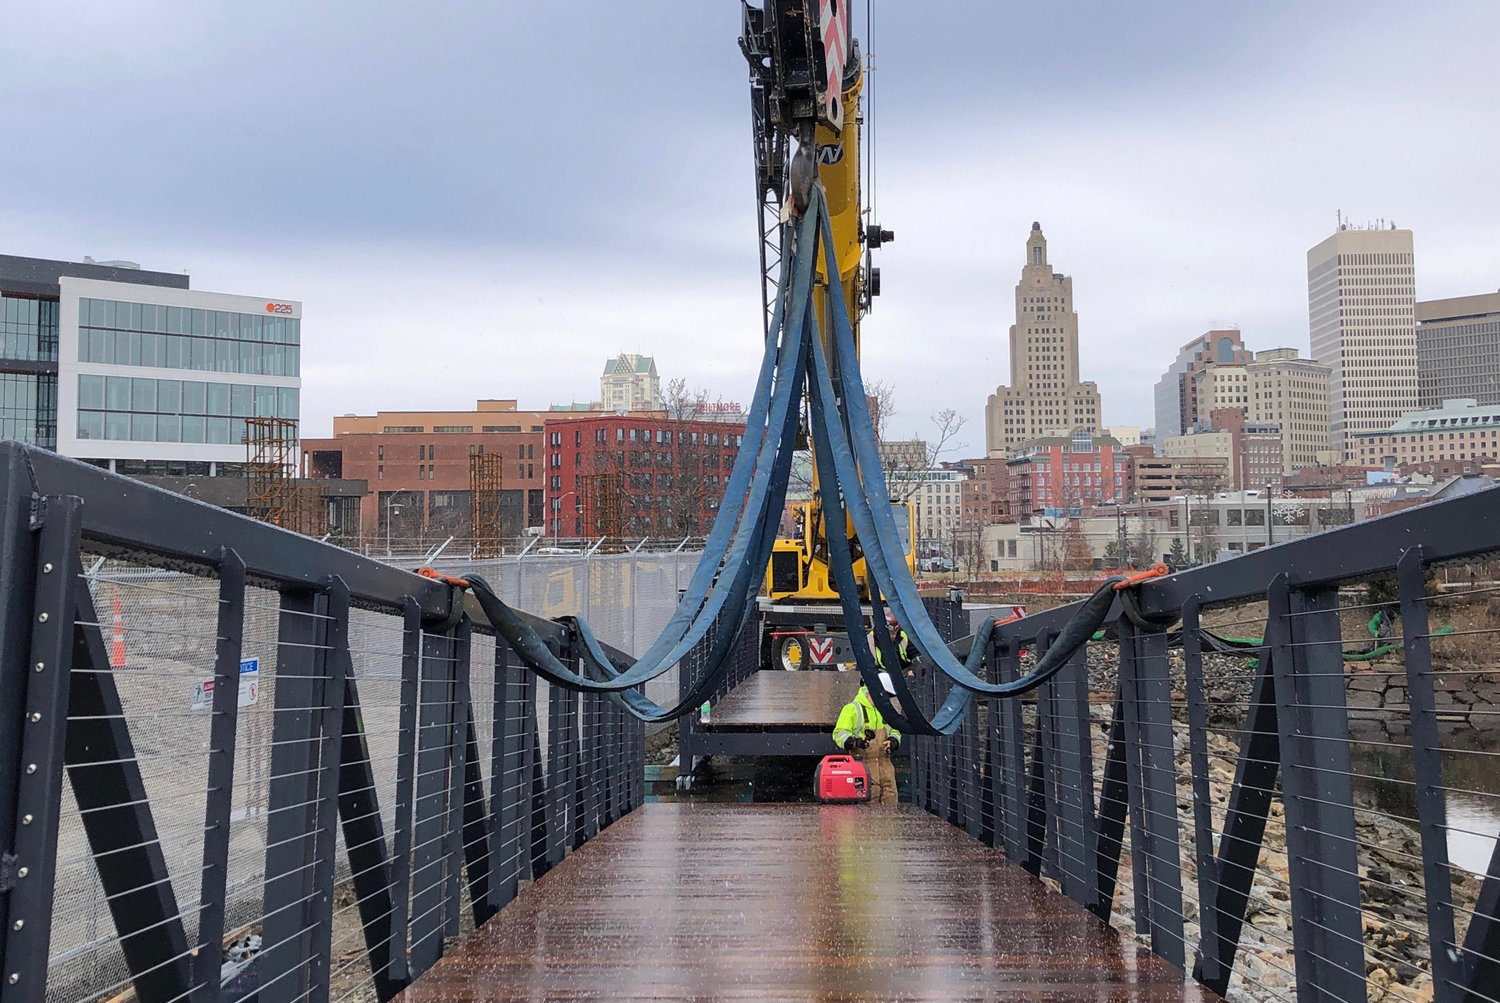 Progress on the Providence River Walkway in the Jewelry District